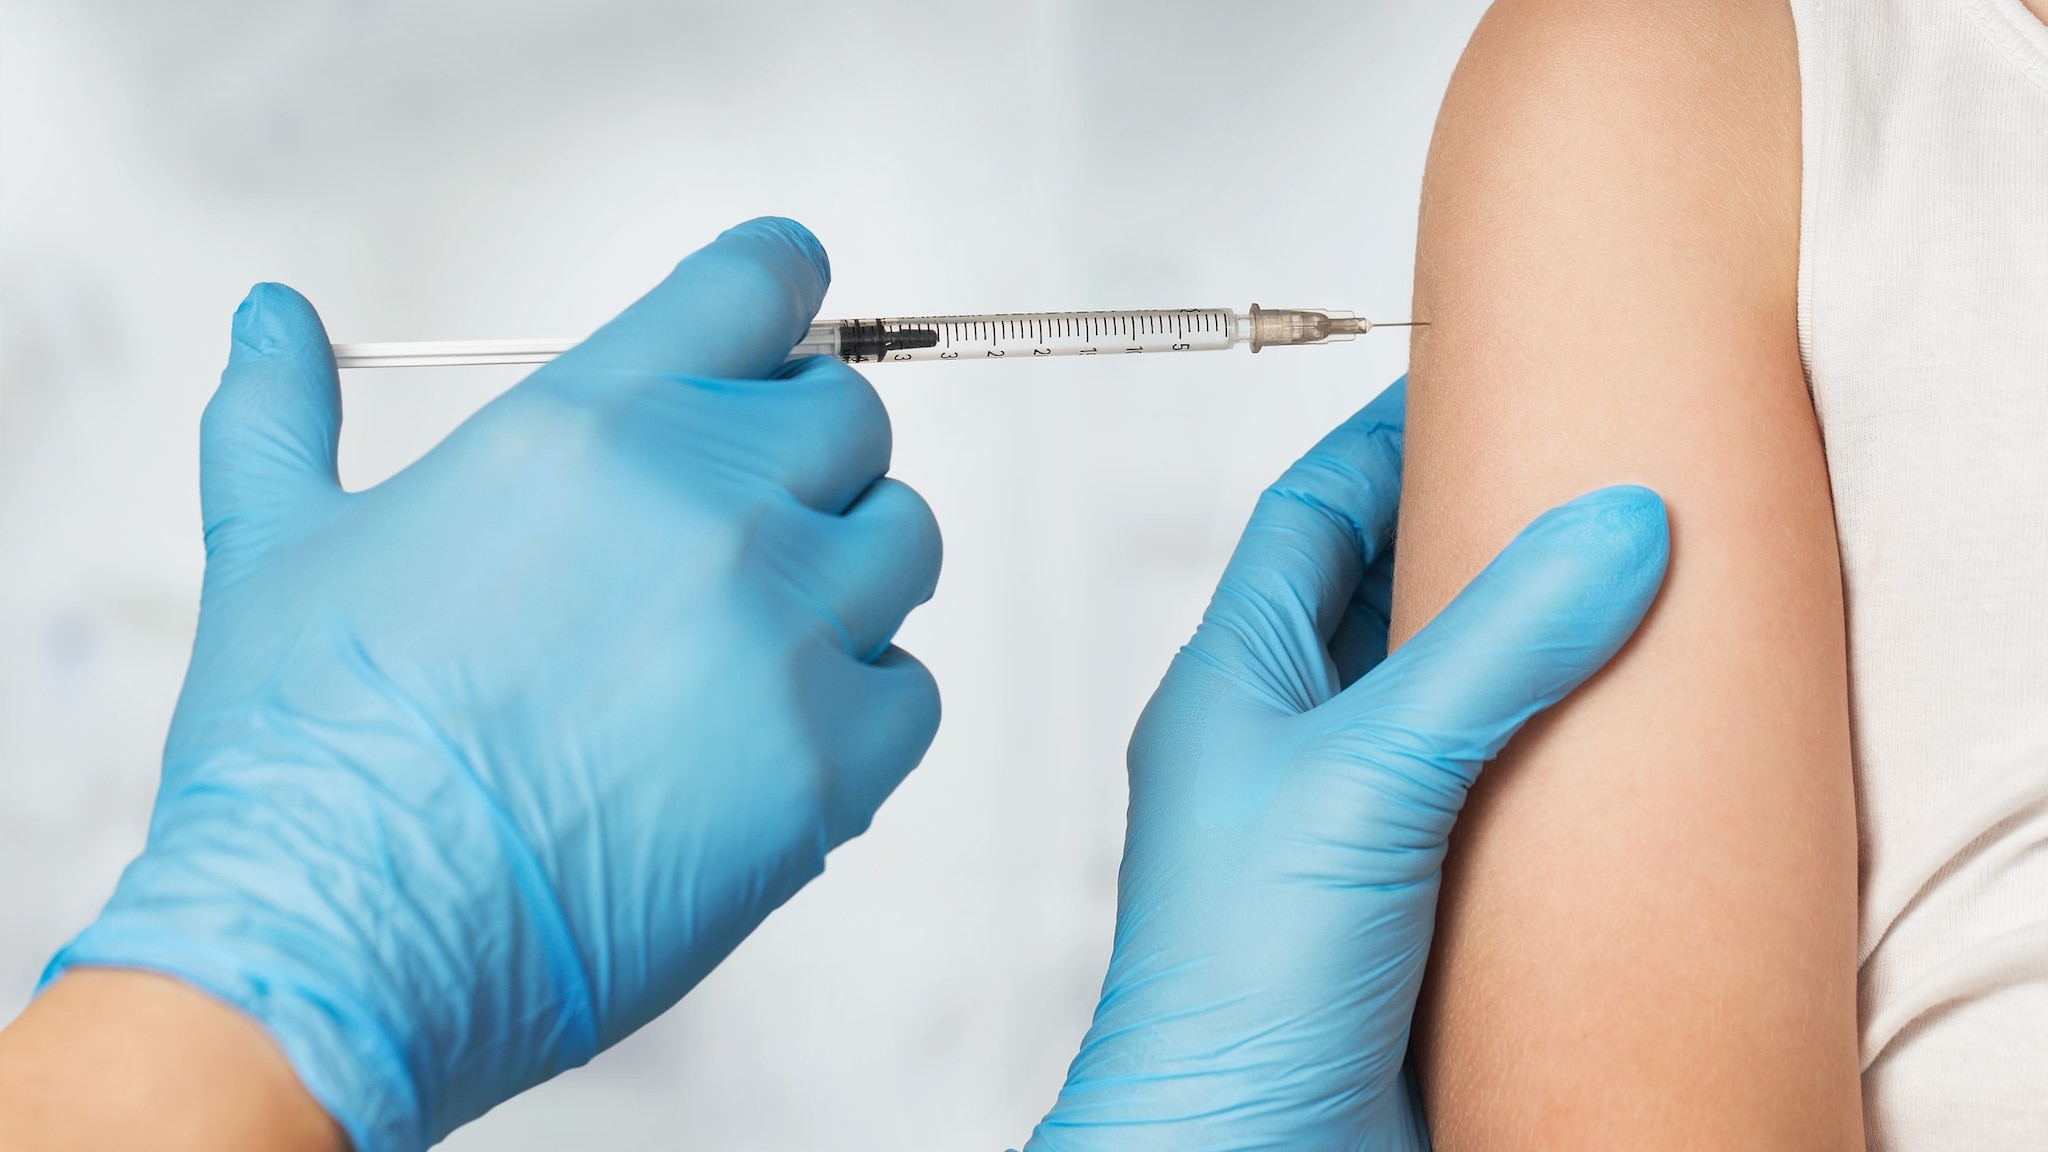 Gloved hands inserting a vaccine syringe into an arm.